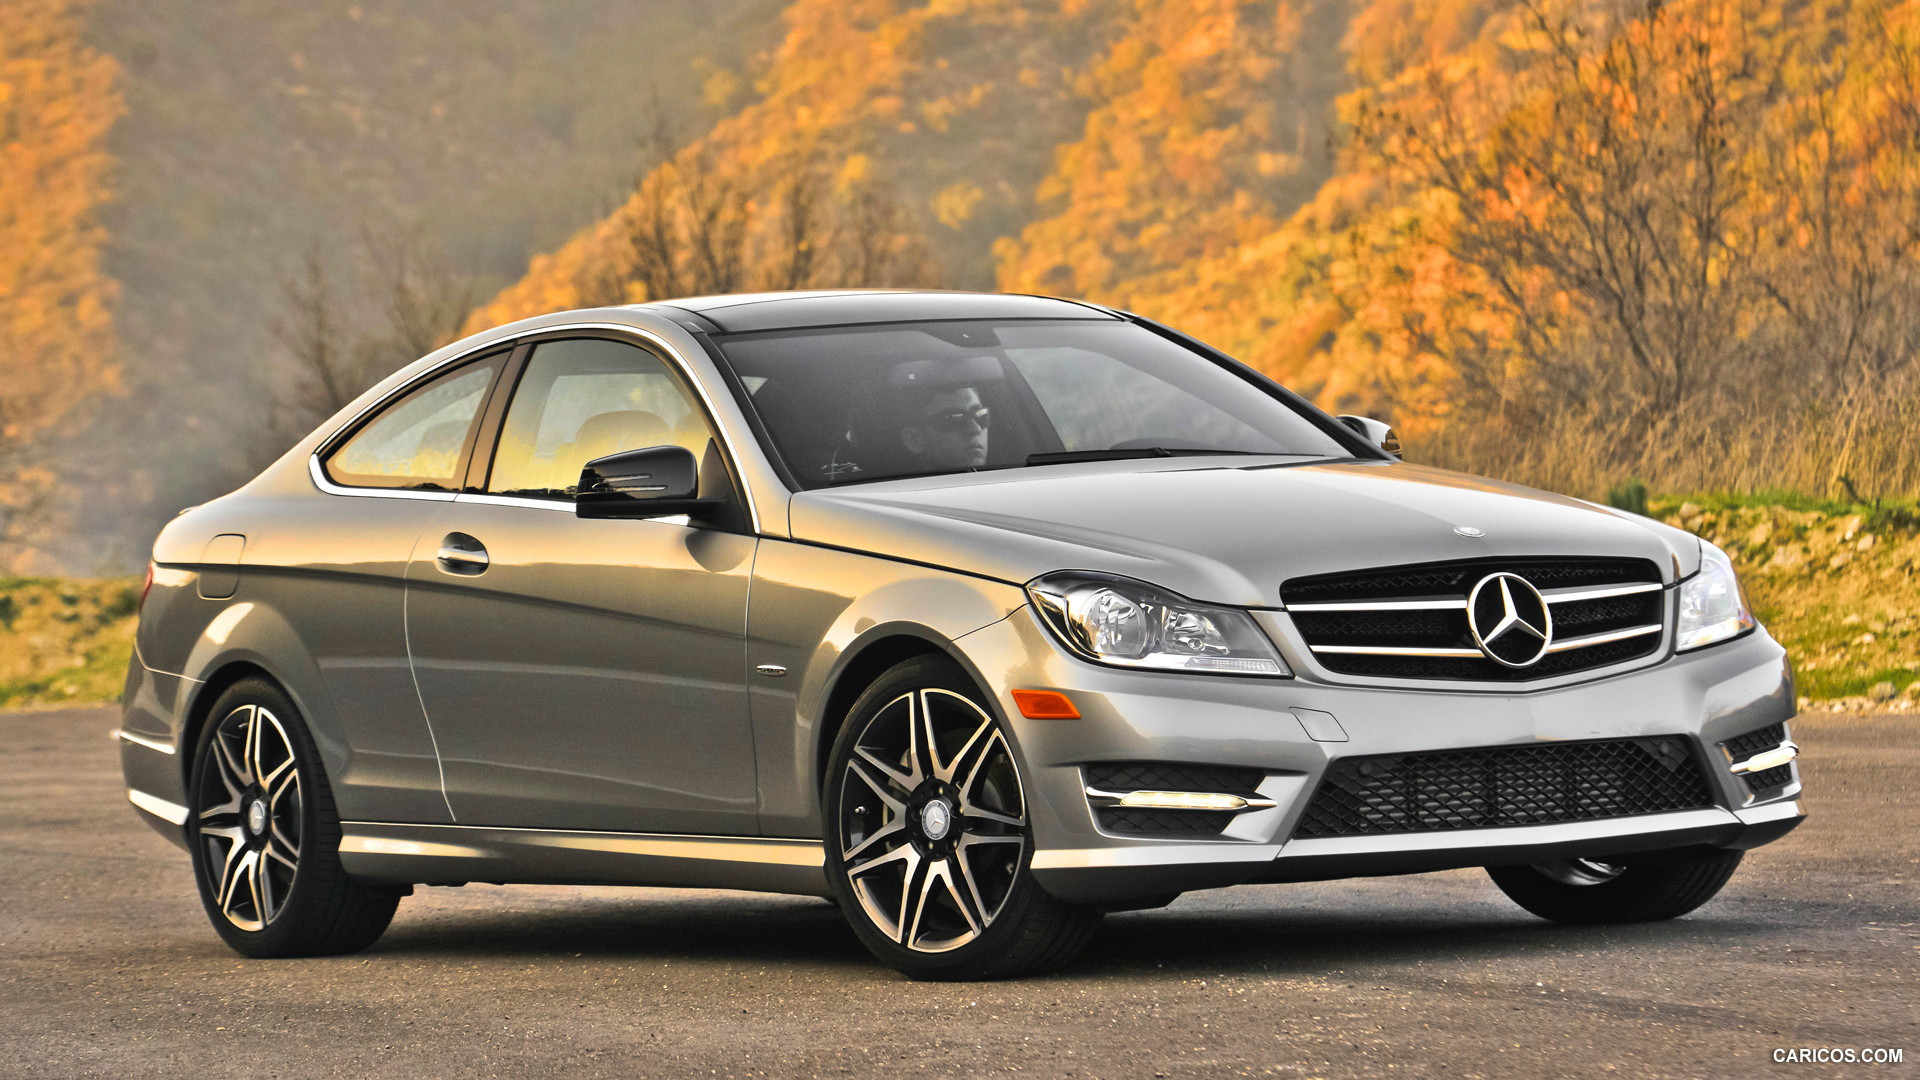 Mercedes-Benz C250 Coupe (2013)  - Front, #61 of 86